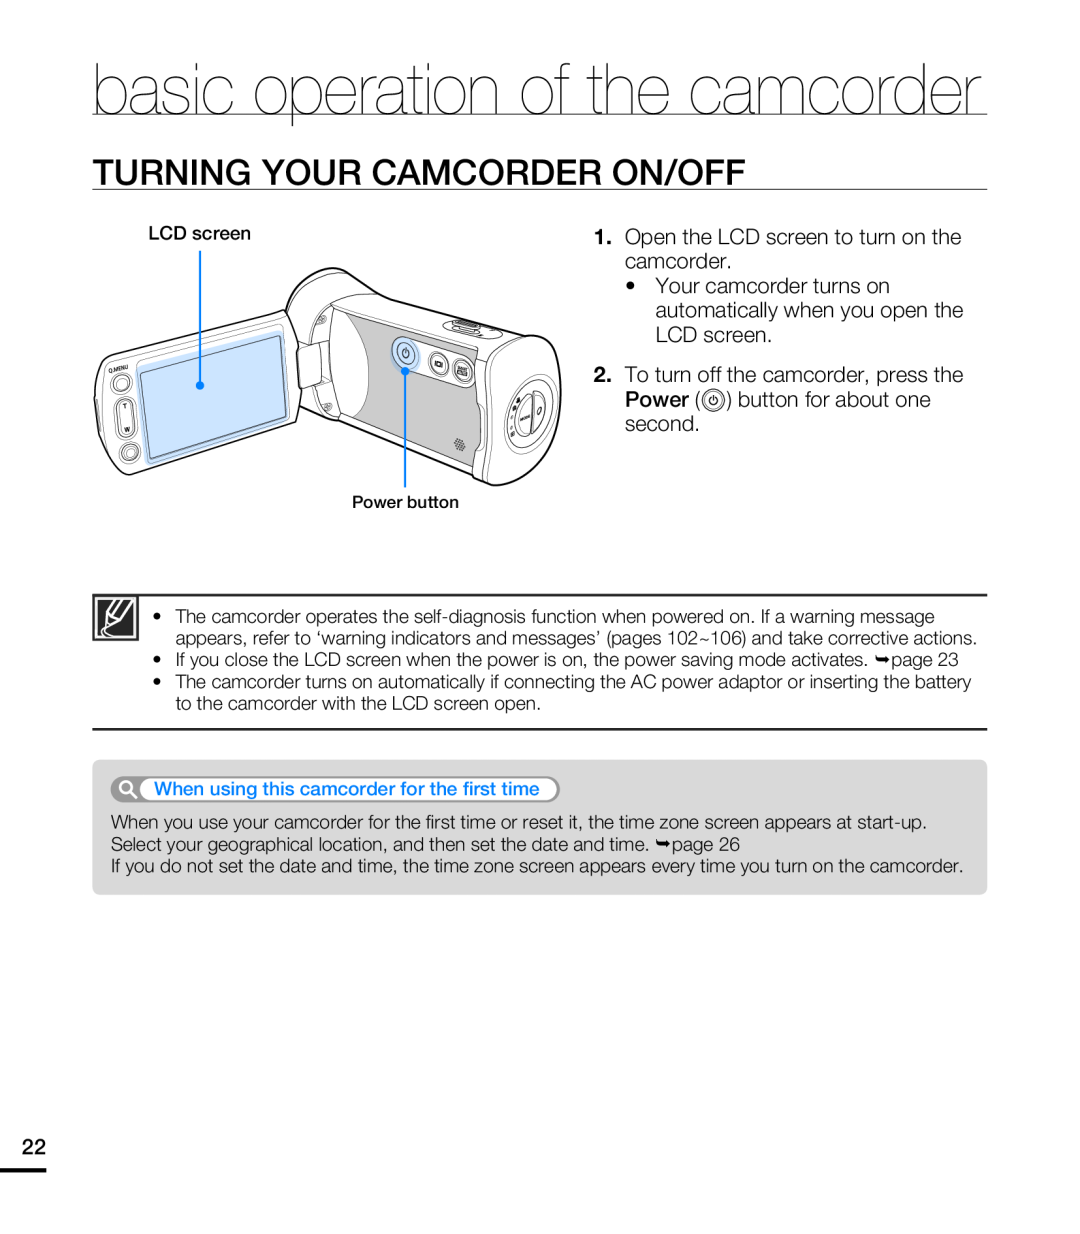 Samsung HMX-T10BP/MEA basic operation of the camcorder, Turning Your Camcorder On/Off, Open the LCD screen to turn on the 